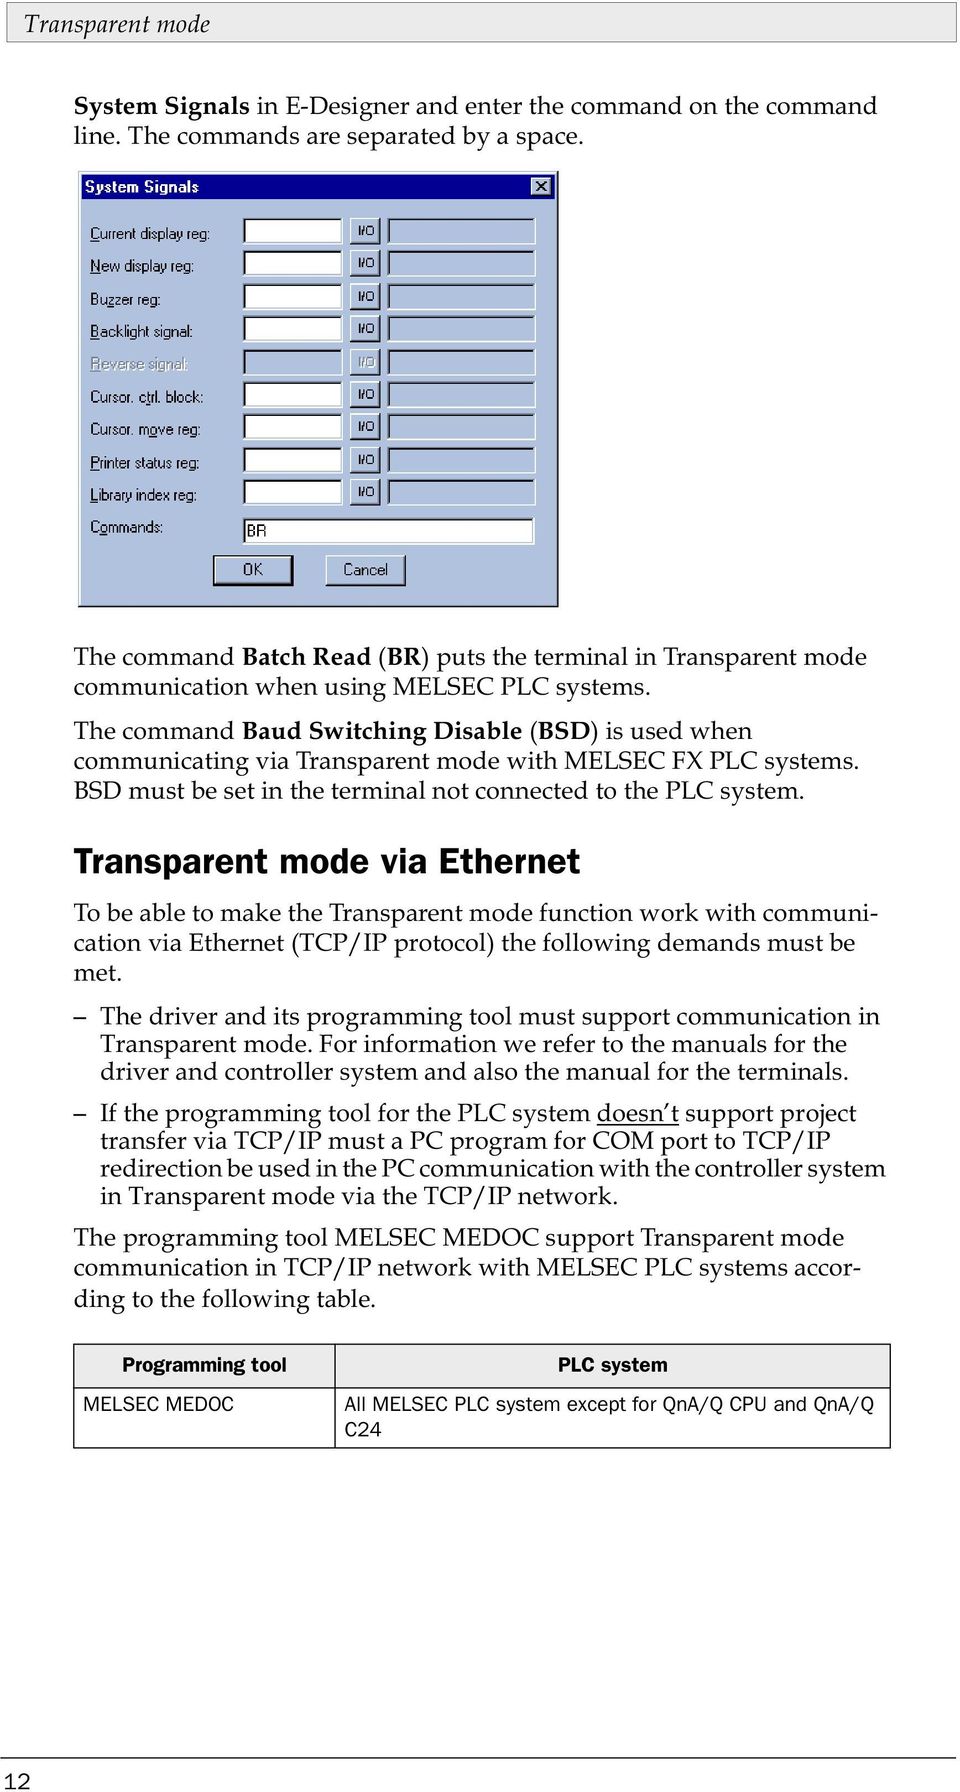 The command Baud Switching Disable (BSD) is used when communicating via Transparent mode with MELSEC FX PLC systems. BSD must be set in the terminal not connected to the PLC system.